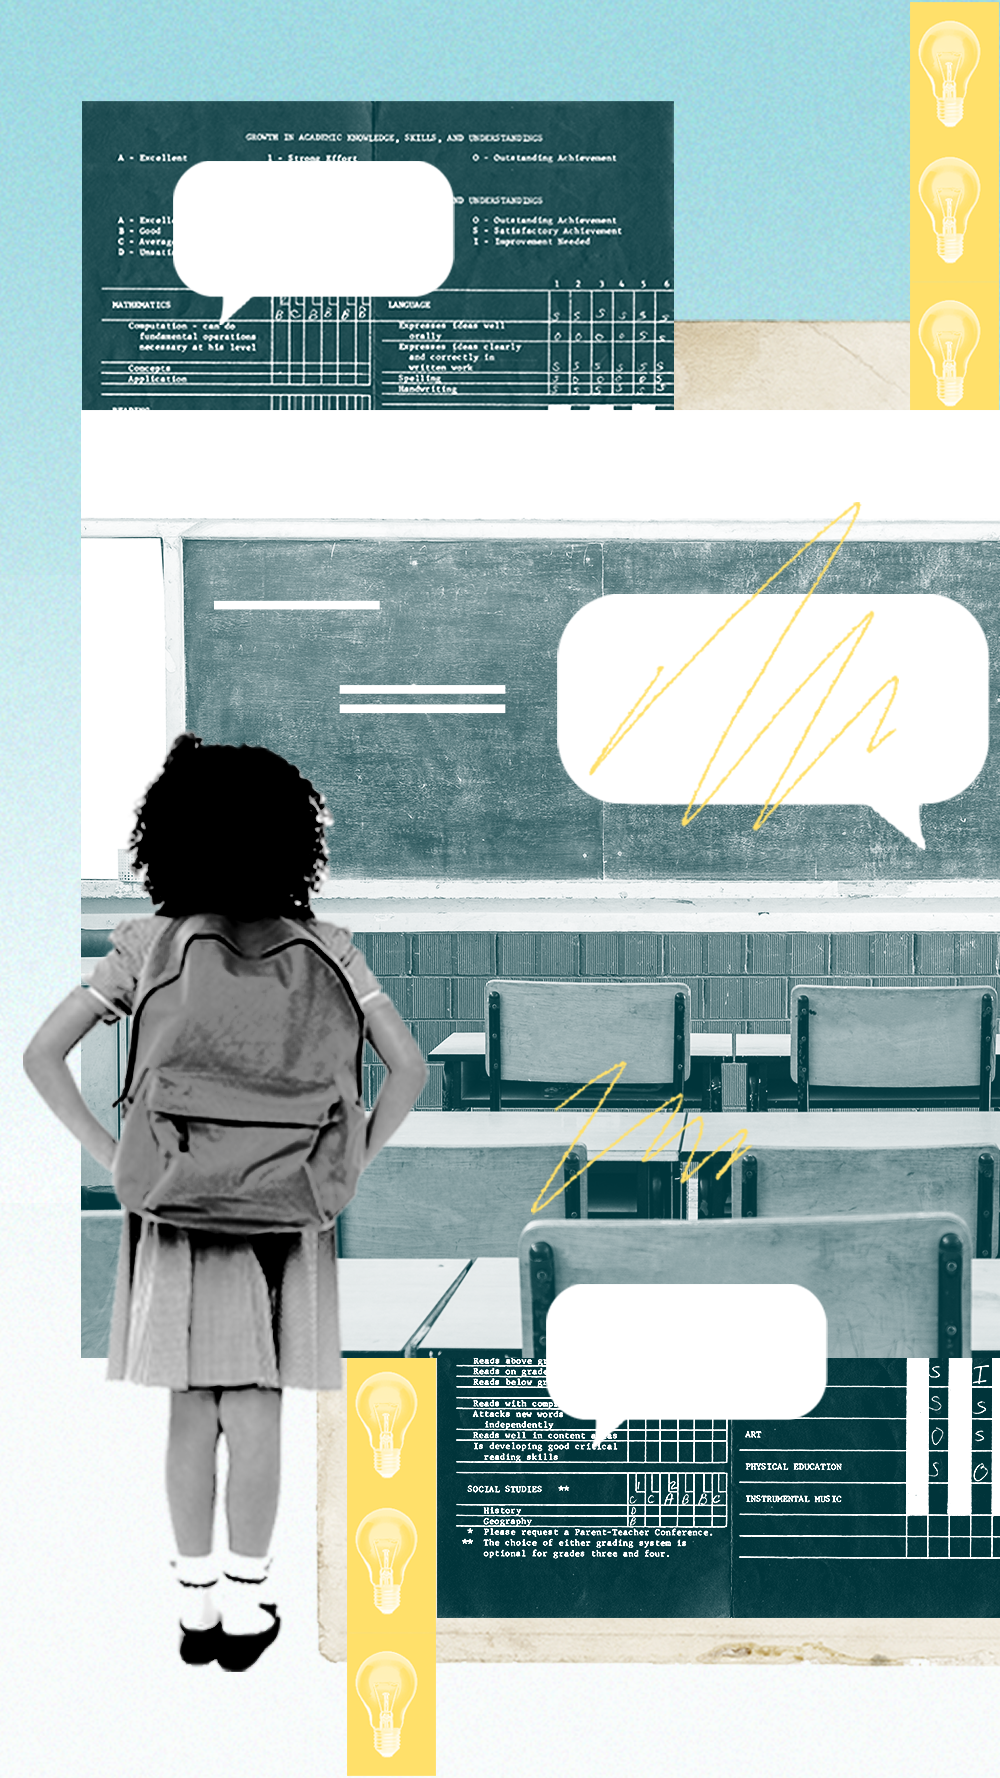 An image depicting a classroom, lightbulbs, thought bubbles, and a child with a backpack.